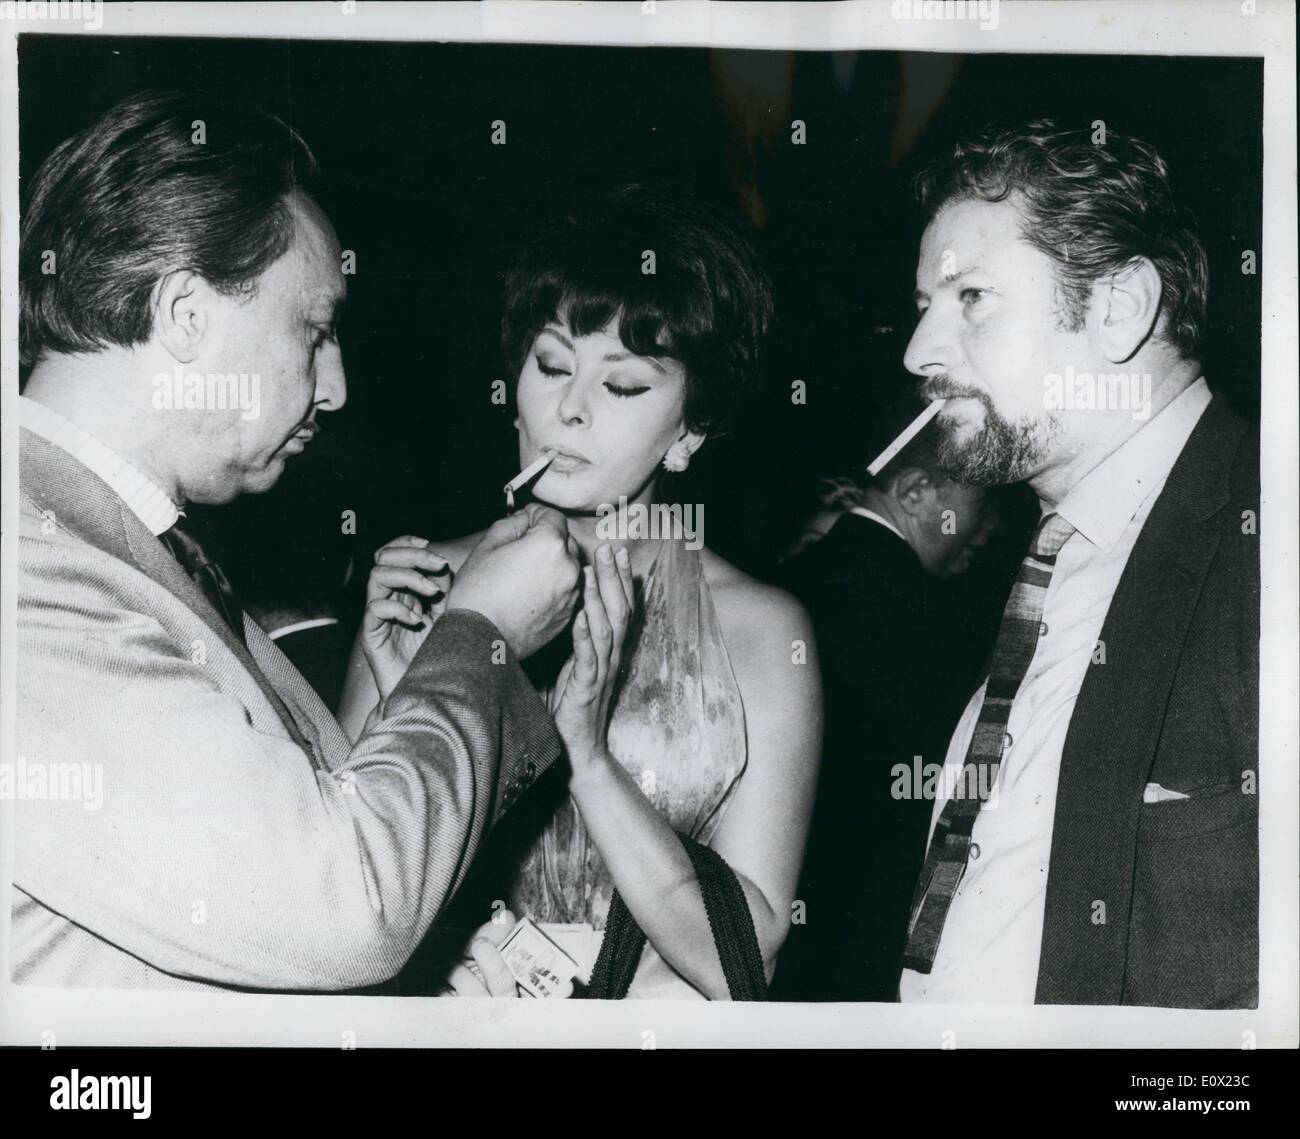 Nov. 11, 1964 - Sophia Loren Receives Guests at Film Party: Popular Italian Film Sophia Loren held a Cocktail party at tje Boulogne studios- Paris last night- where she is working on her newest film '' Lady L''. Photo Shows Sophia Loren receives a light for her Cigarette from Romain Gary (left) author of the film story-watched by Peter Ustinov at the party last night. Stock Photo